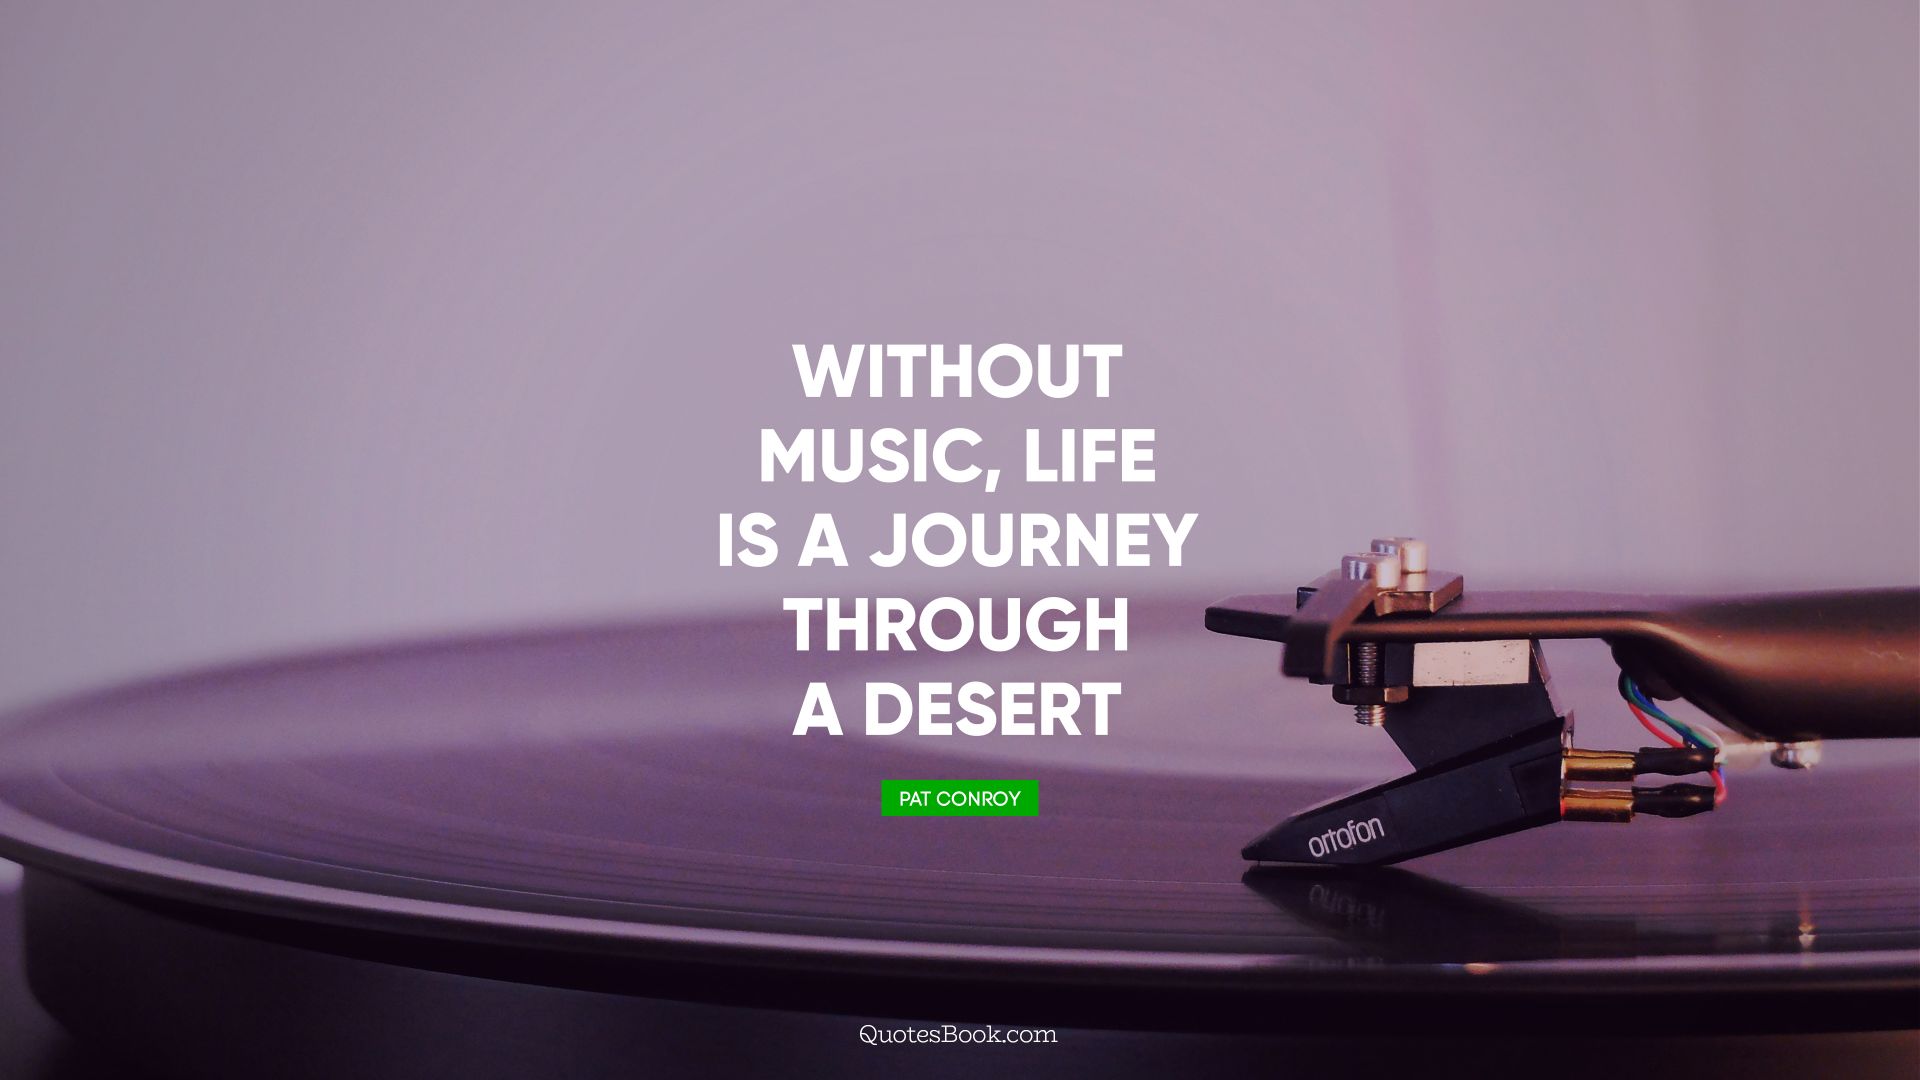 Without music, life is a journey through a desert. - Quote by Pat Conroy